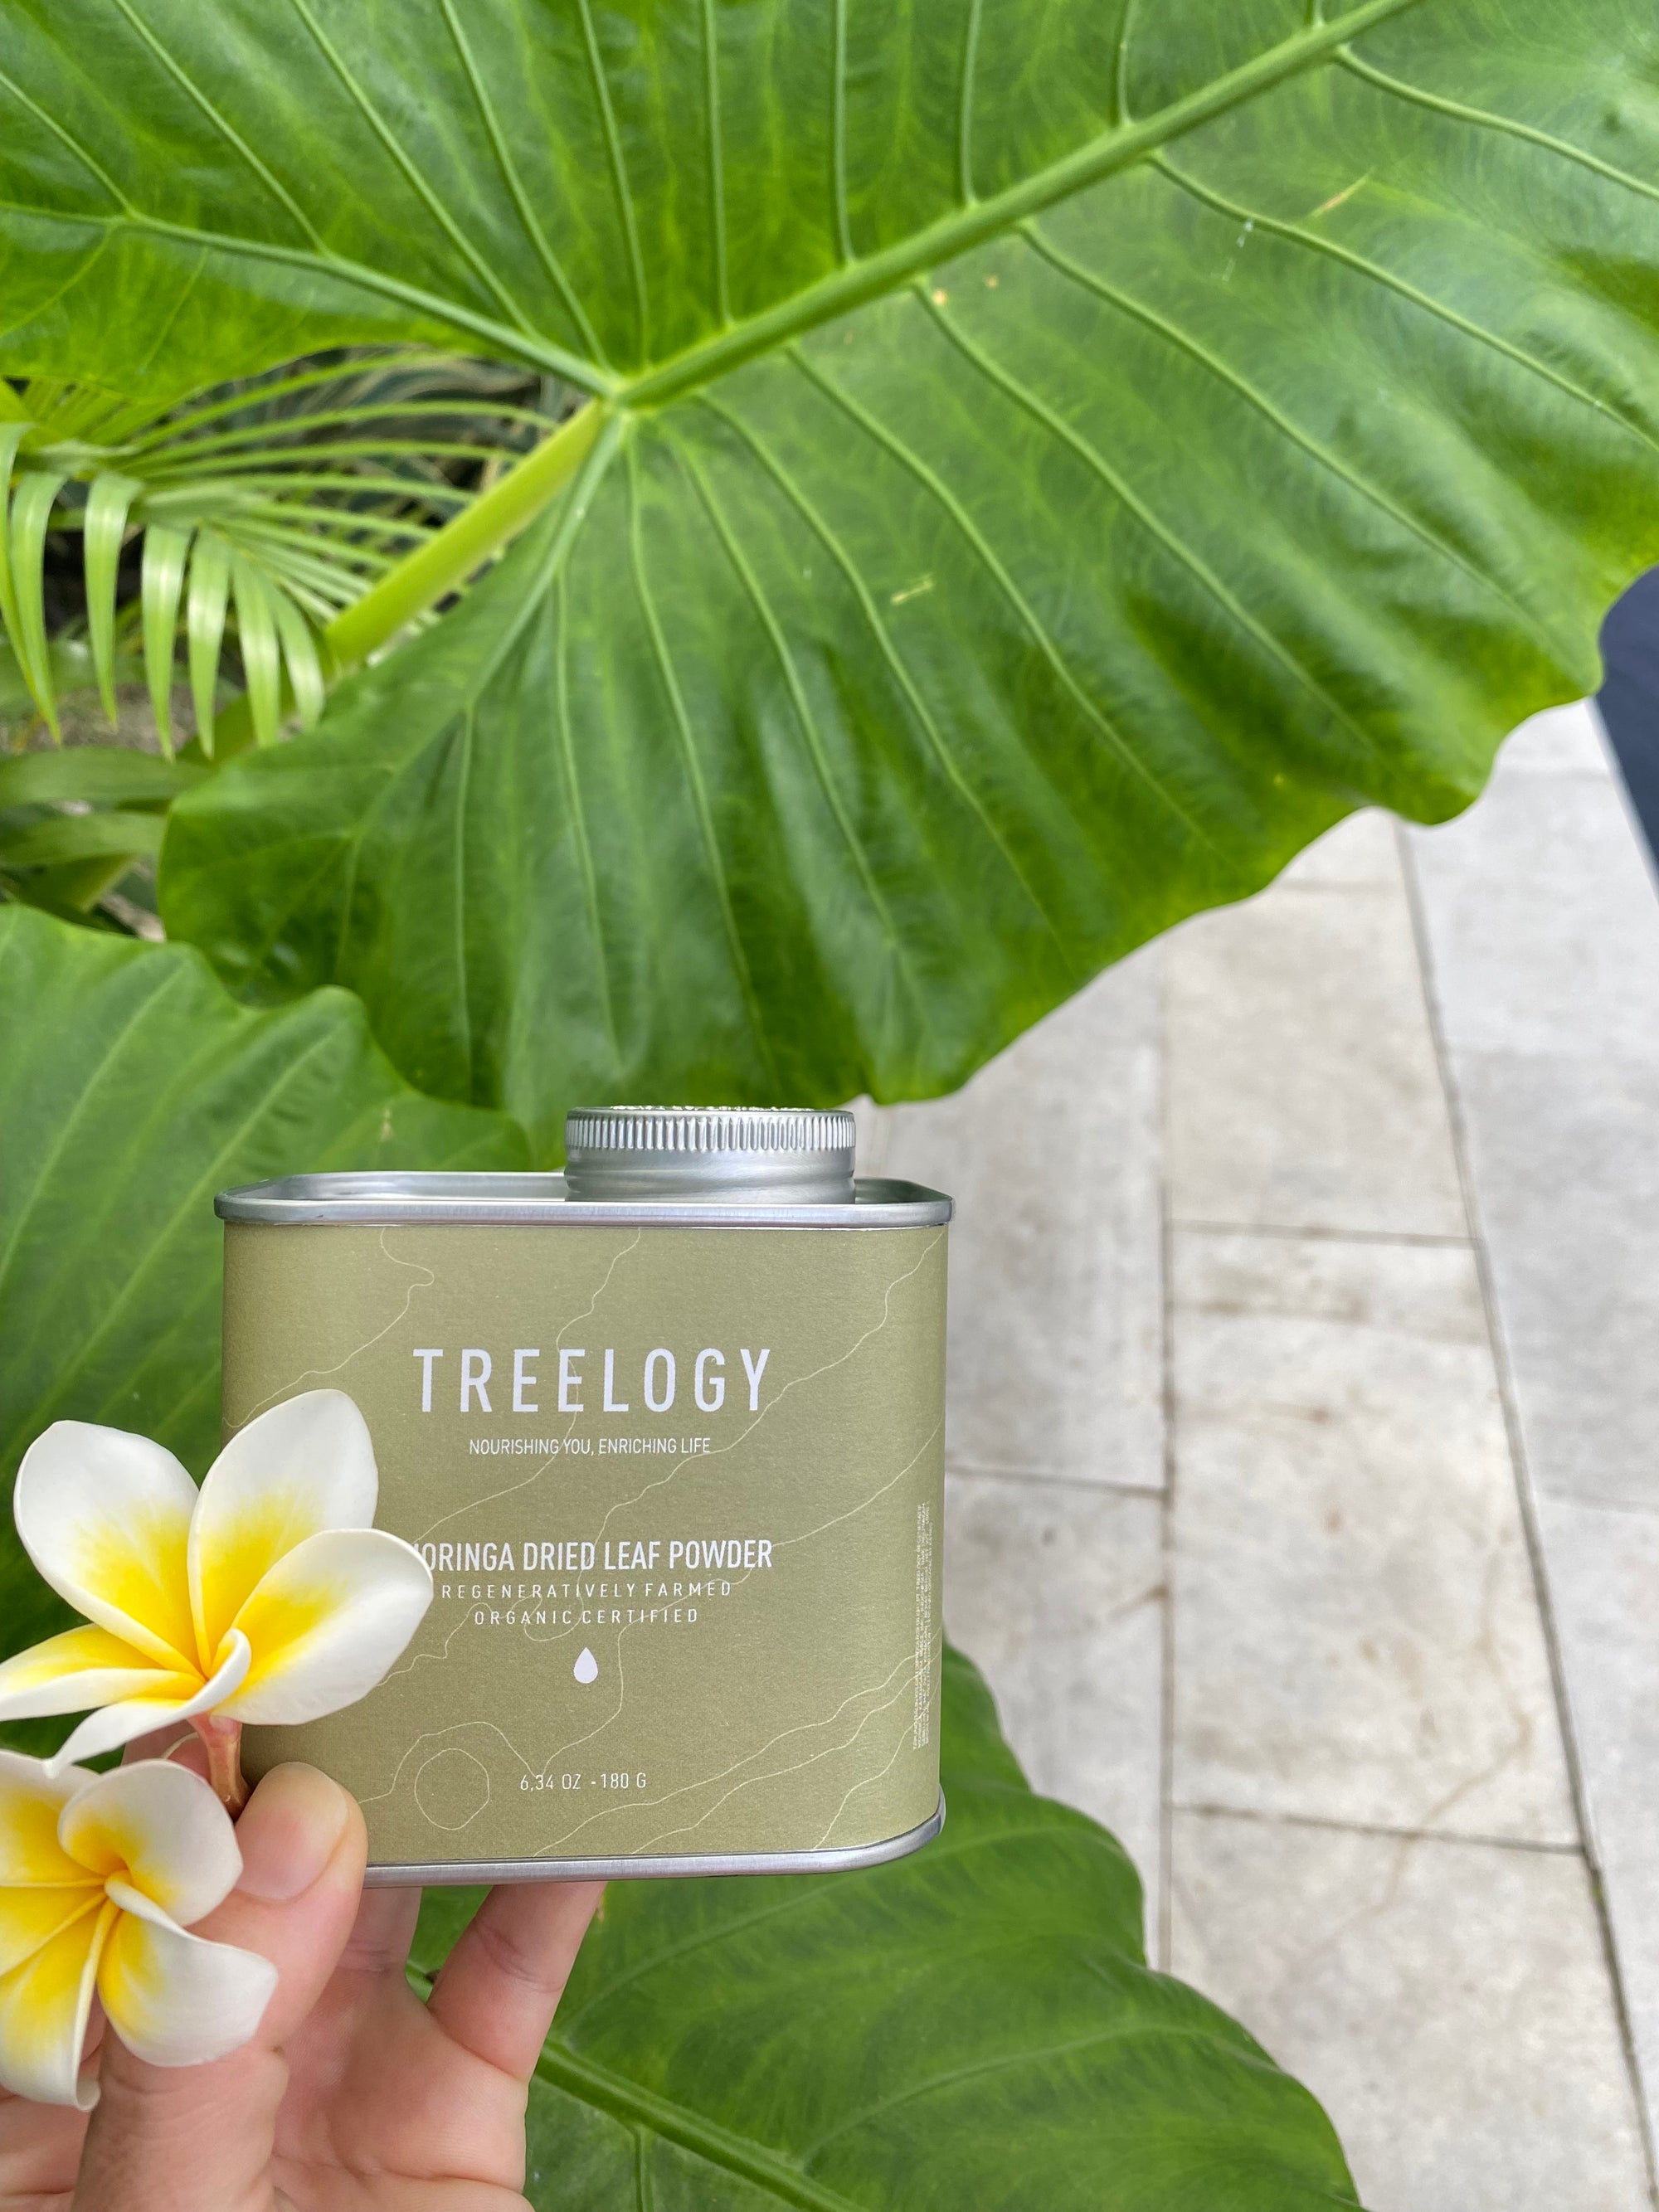 Our new favorite morning routine with Treelogy — Moringa from the heart of Bali!